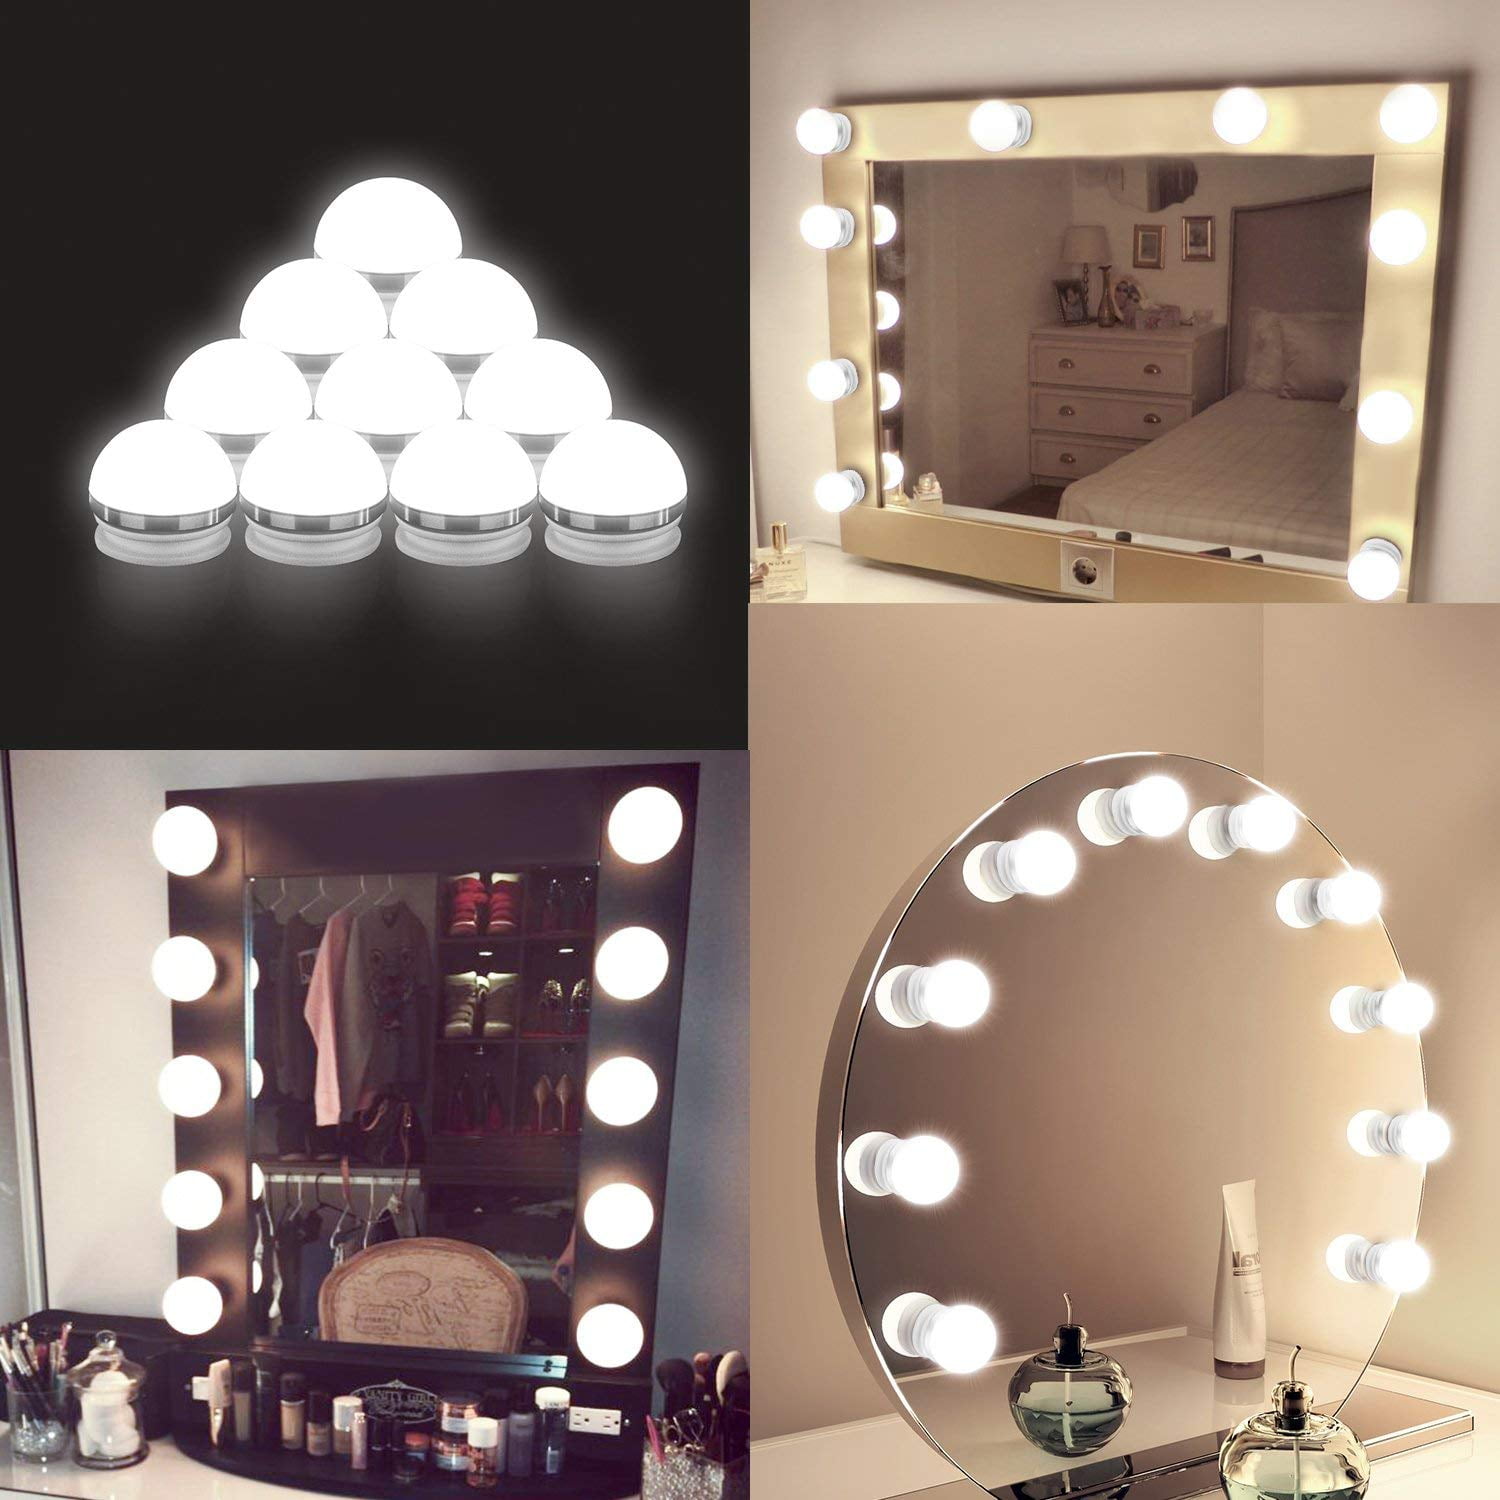 Hollywood Lighted Makeup Vanity Mirror, Led Mirror Lights Not Working